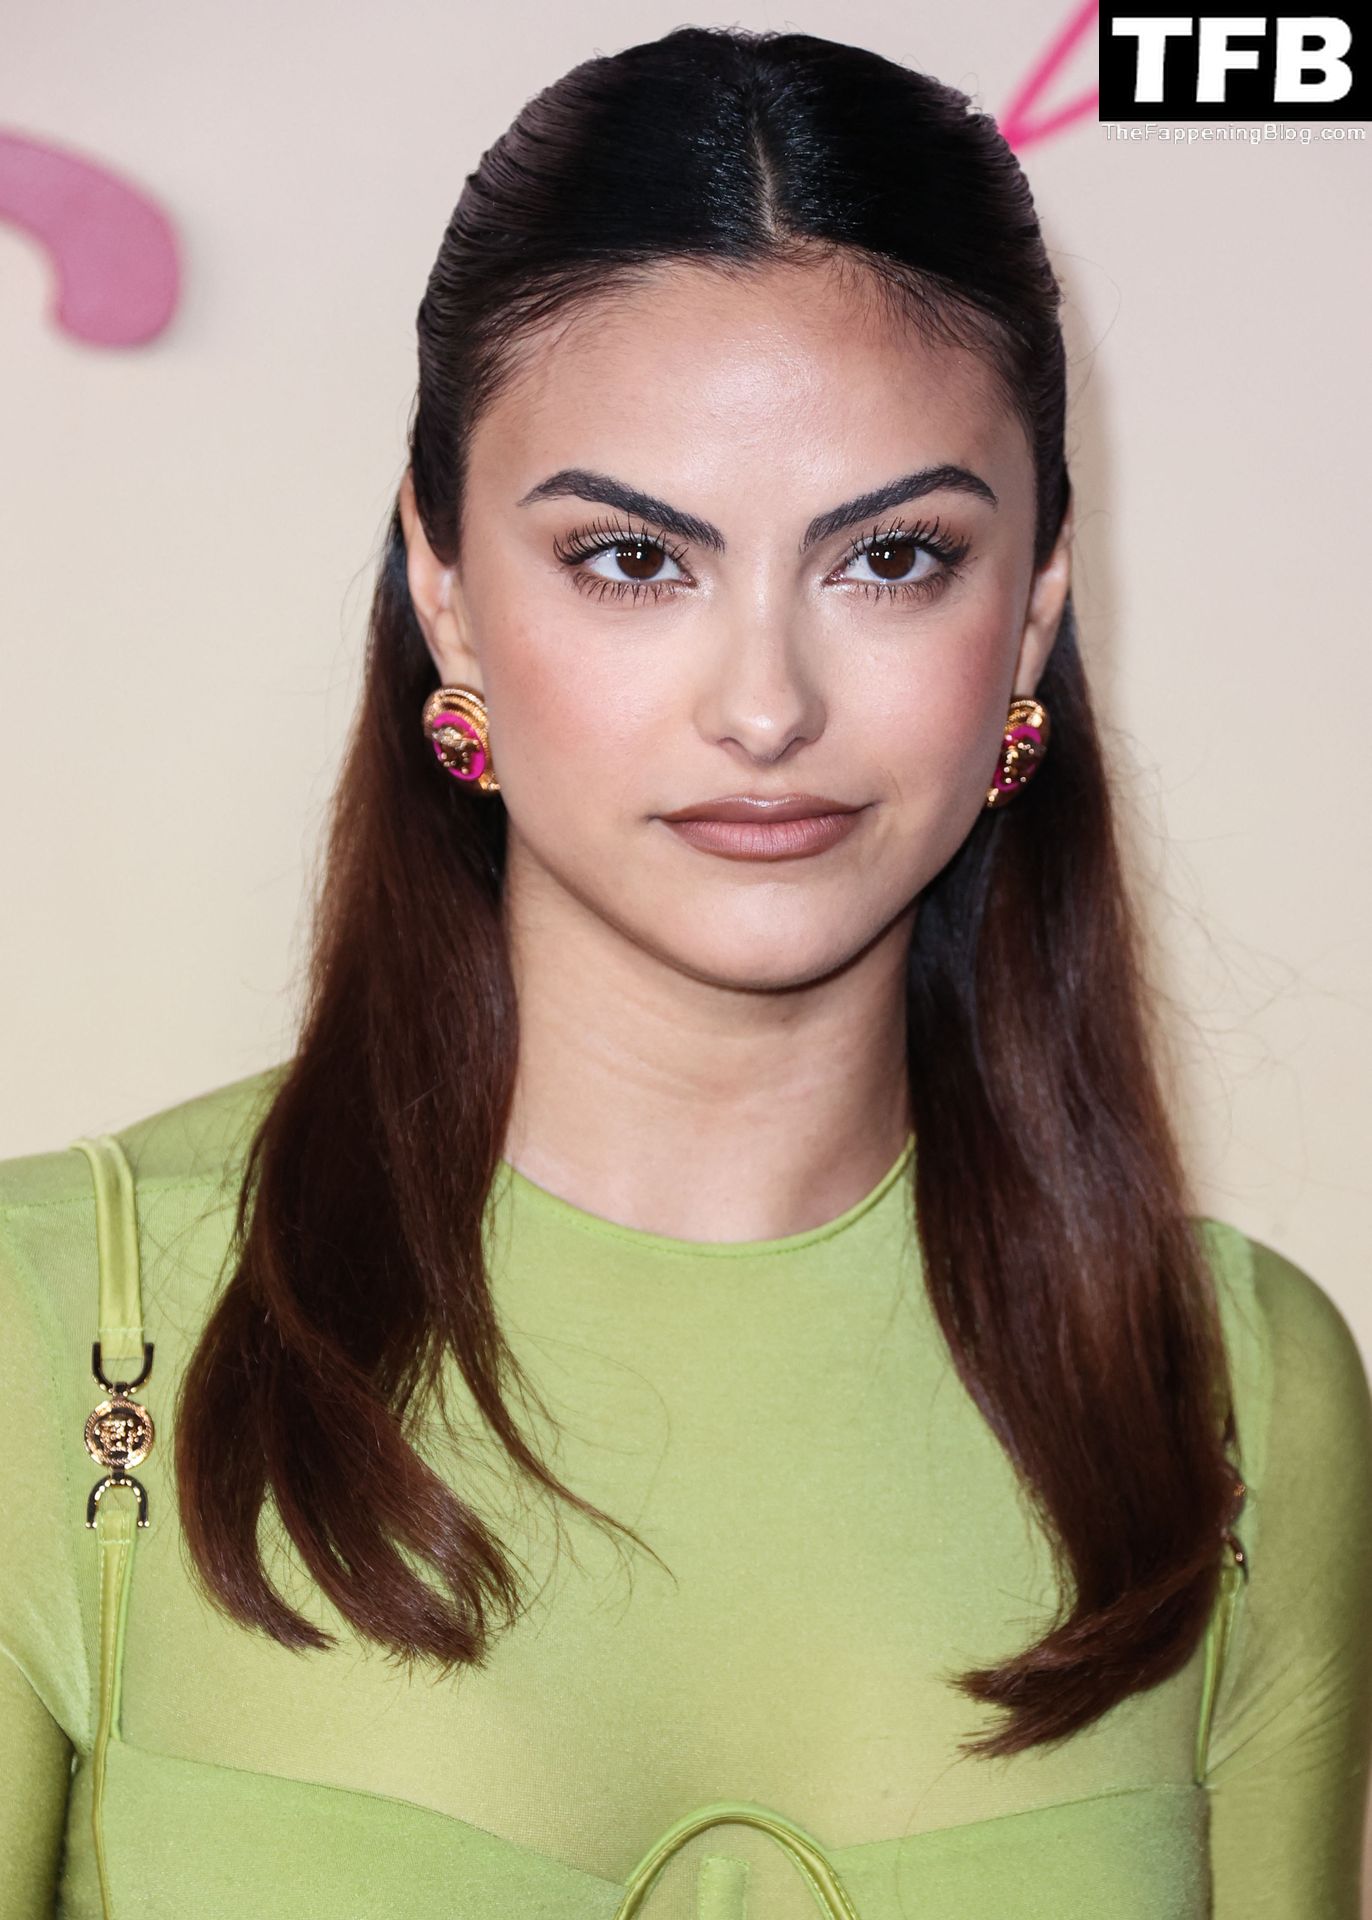 Camila-Mendes-Sexy-The-Fappening-Blog-77.jpg